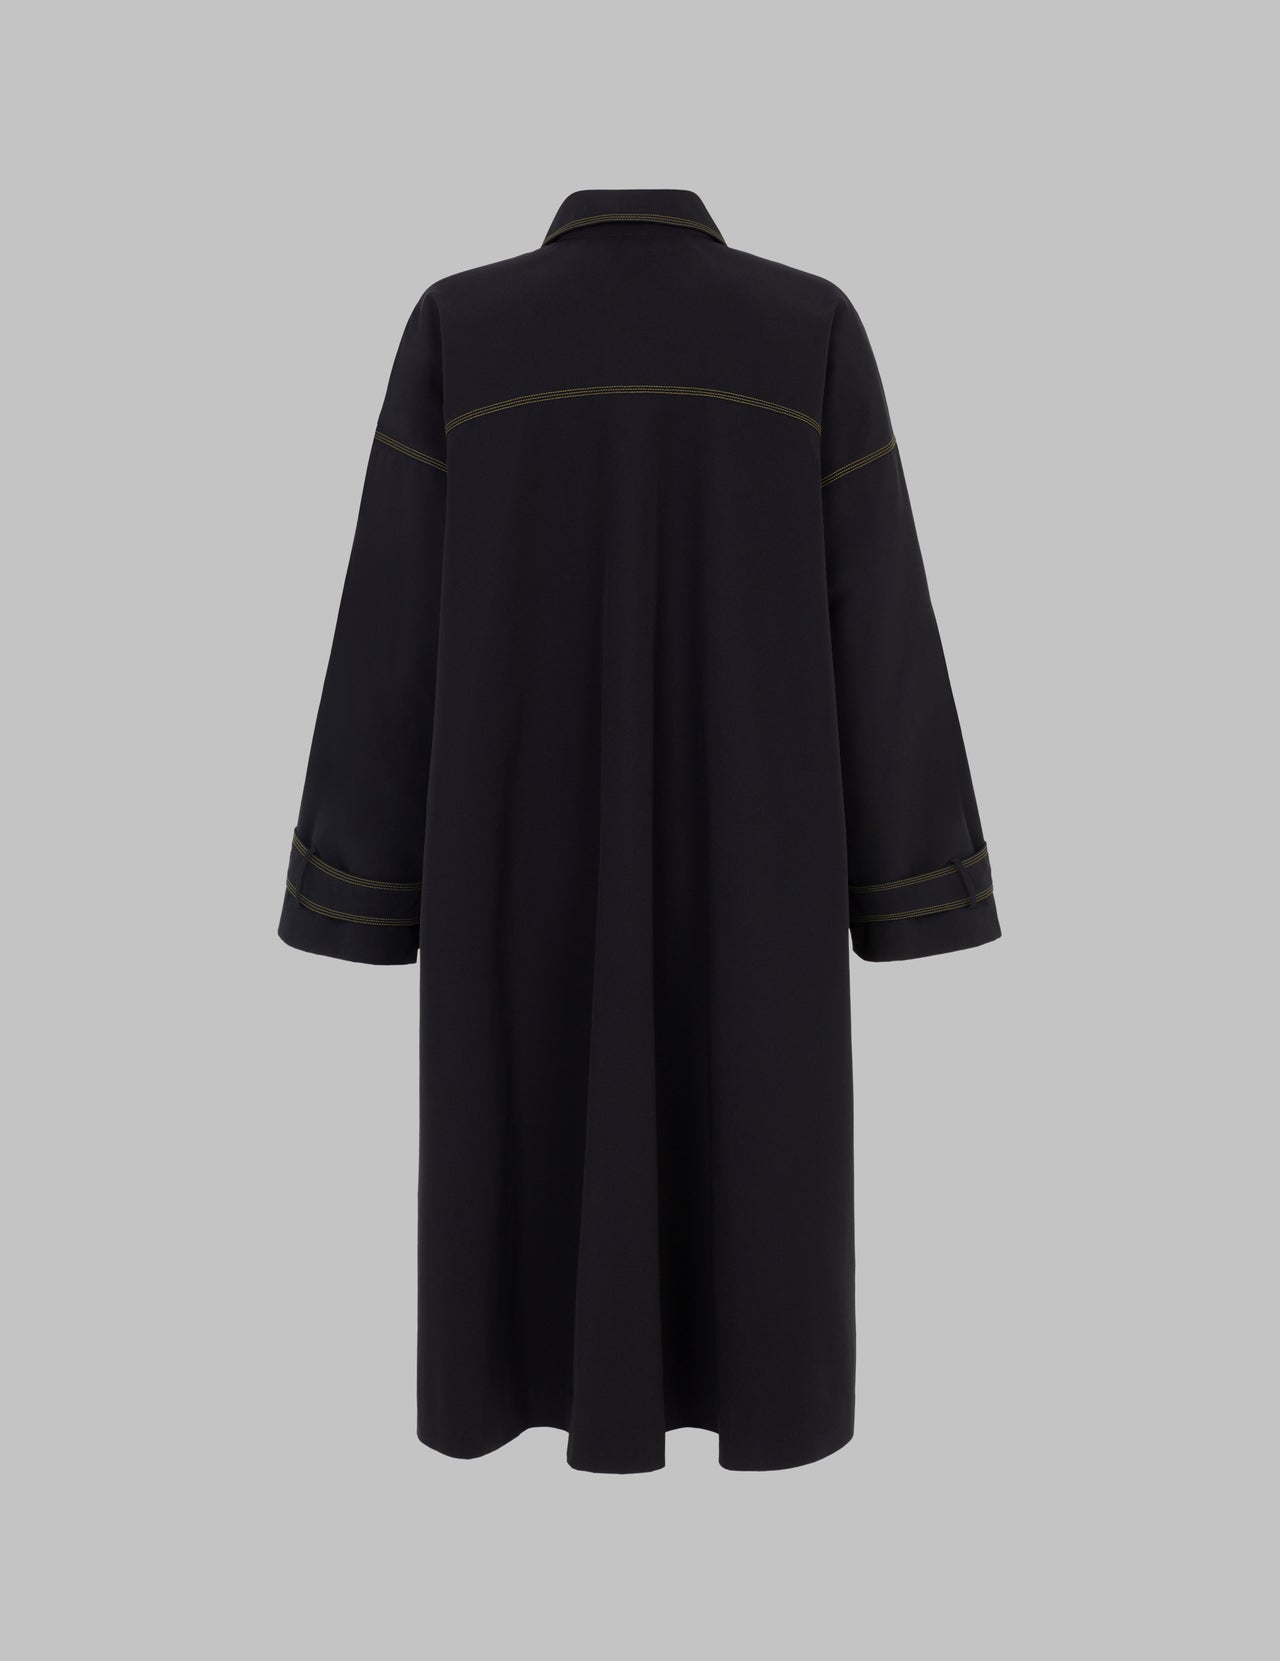  Midnight Black Organic Cotton and Recycled Polyester Duster Coat 